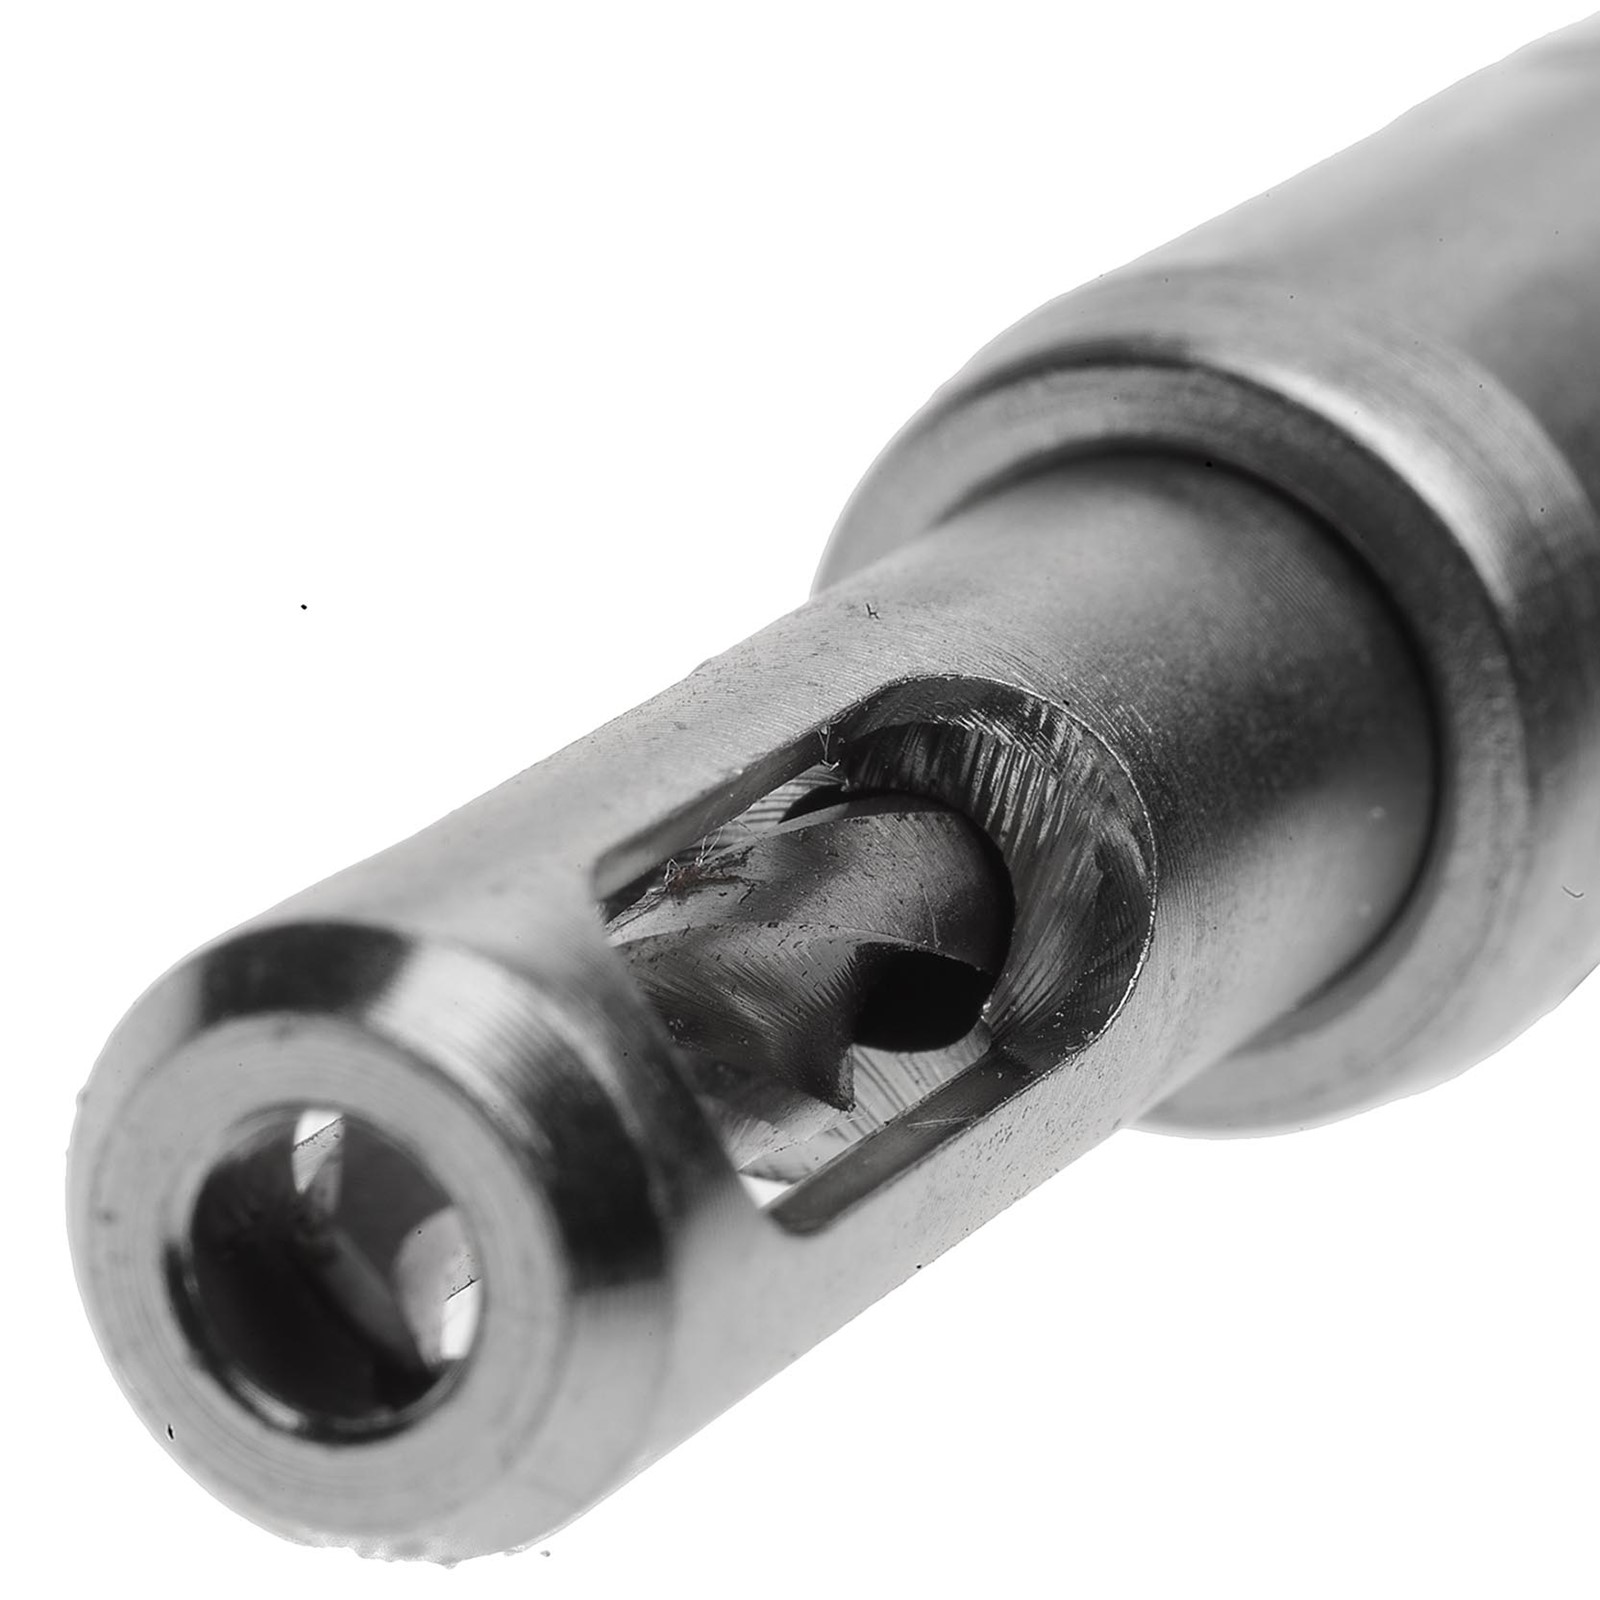 Snappy 45107 Hinge Bit Drill Chuck for sale online